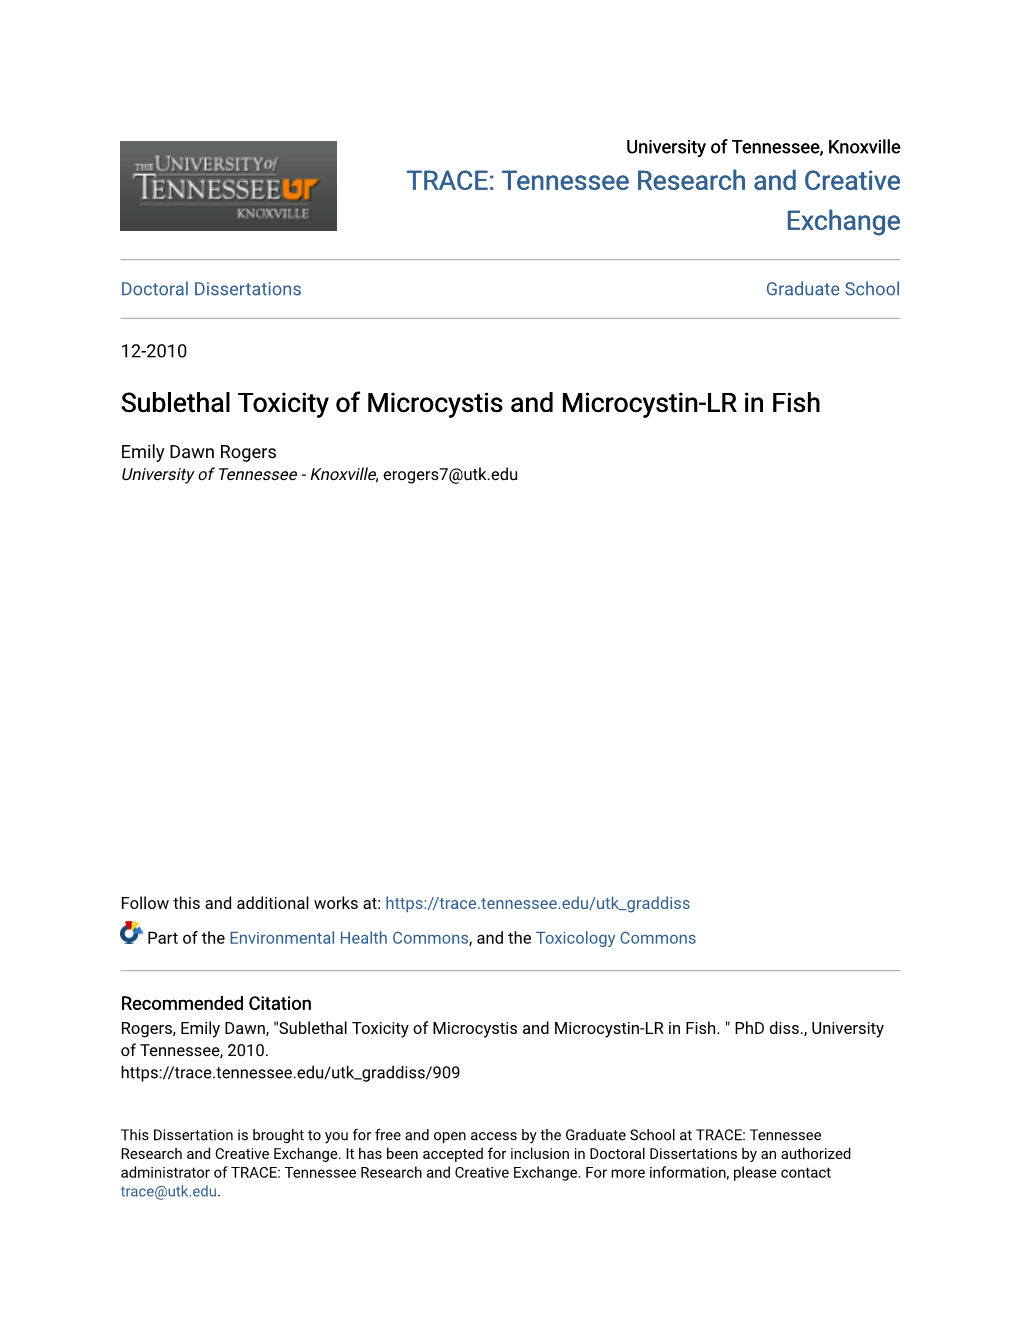 Sublethal Toxicity of Microcystis and Microcystin-LR in Fish